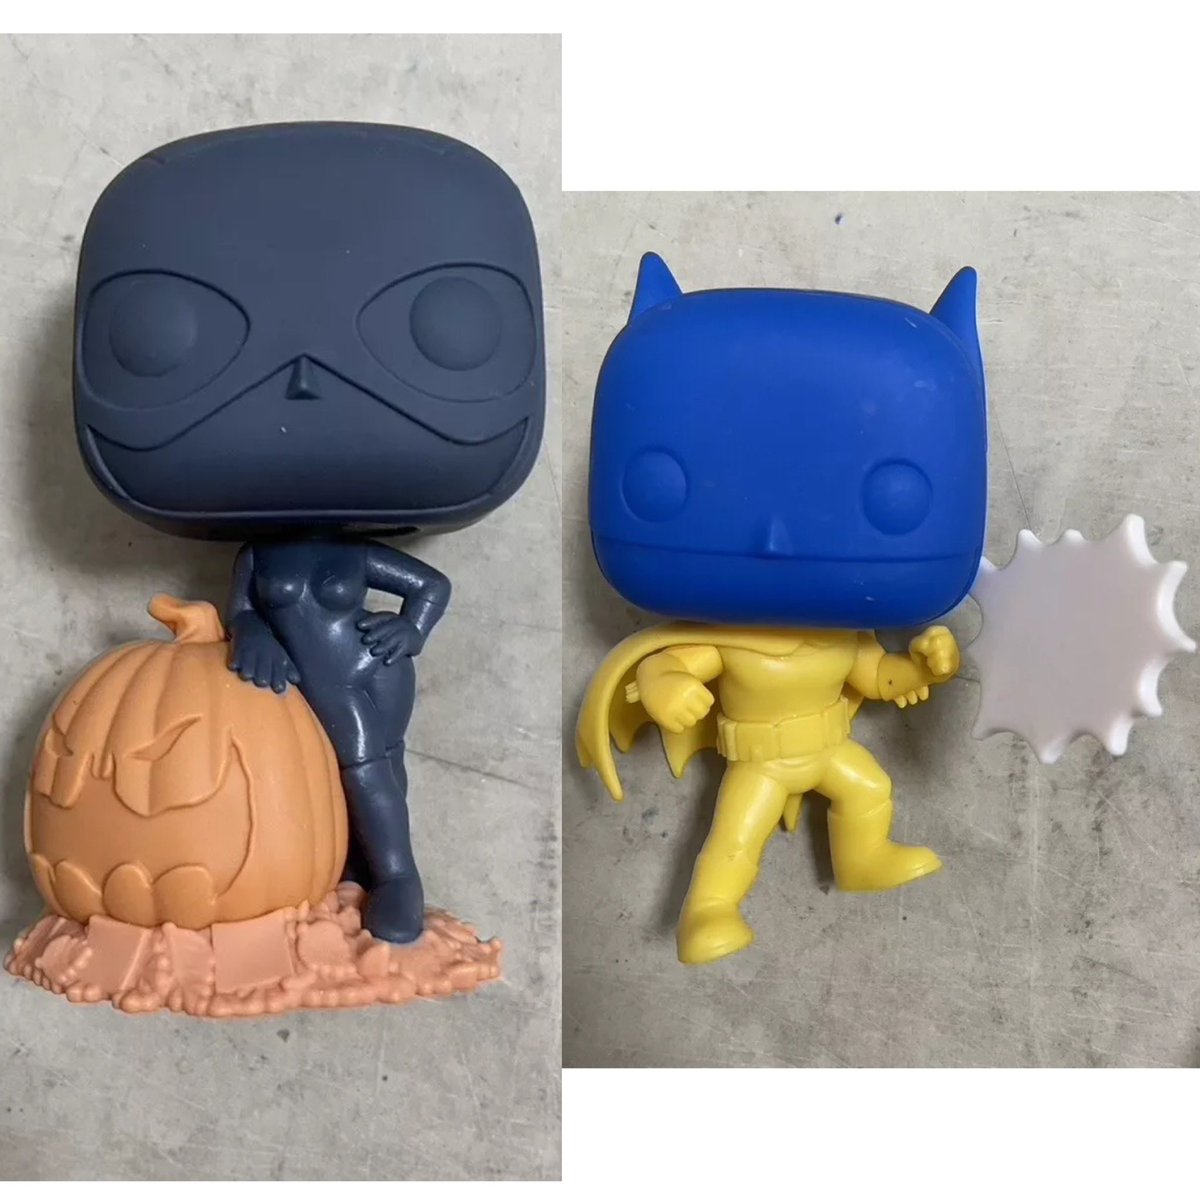 First look at potential Catwoman & Batman Pops! Scrappers have been spotted on eBay. . #DC #Funko #FunkoPop #FunkoPopVinyl #Pop #PopVinyl #Collectibles #Collectible #FunkoCollector #FunkoPops #Collector #Toy #Toys #DisTrackers